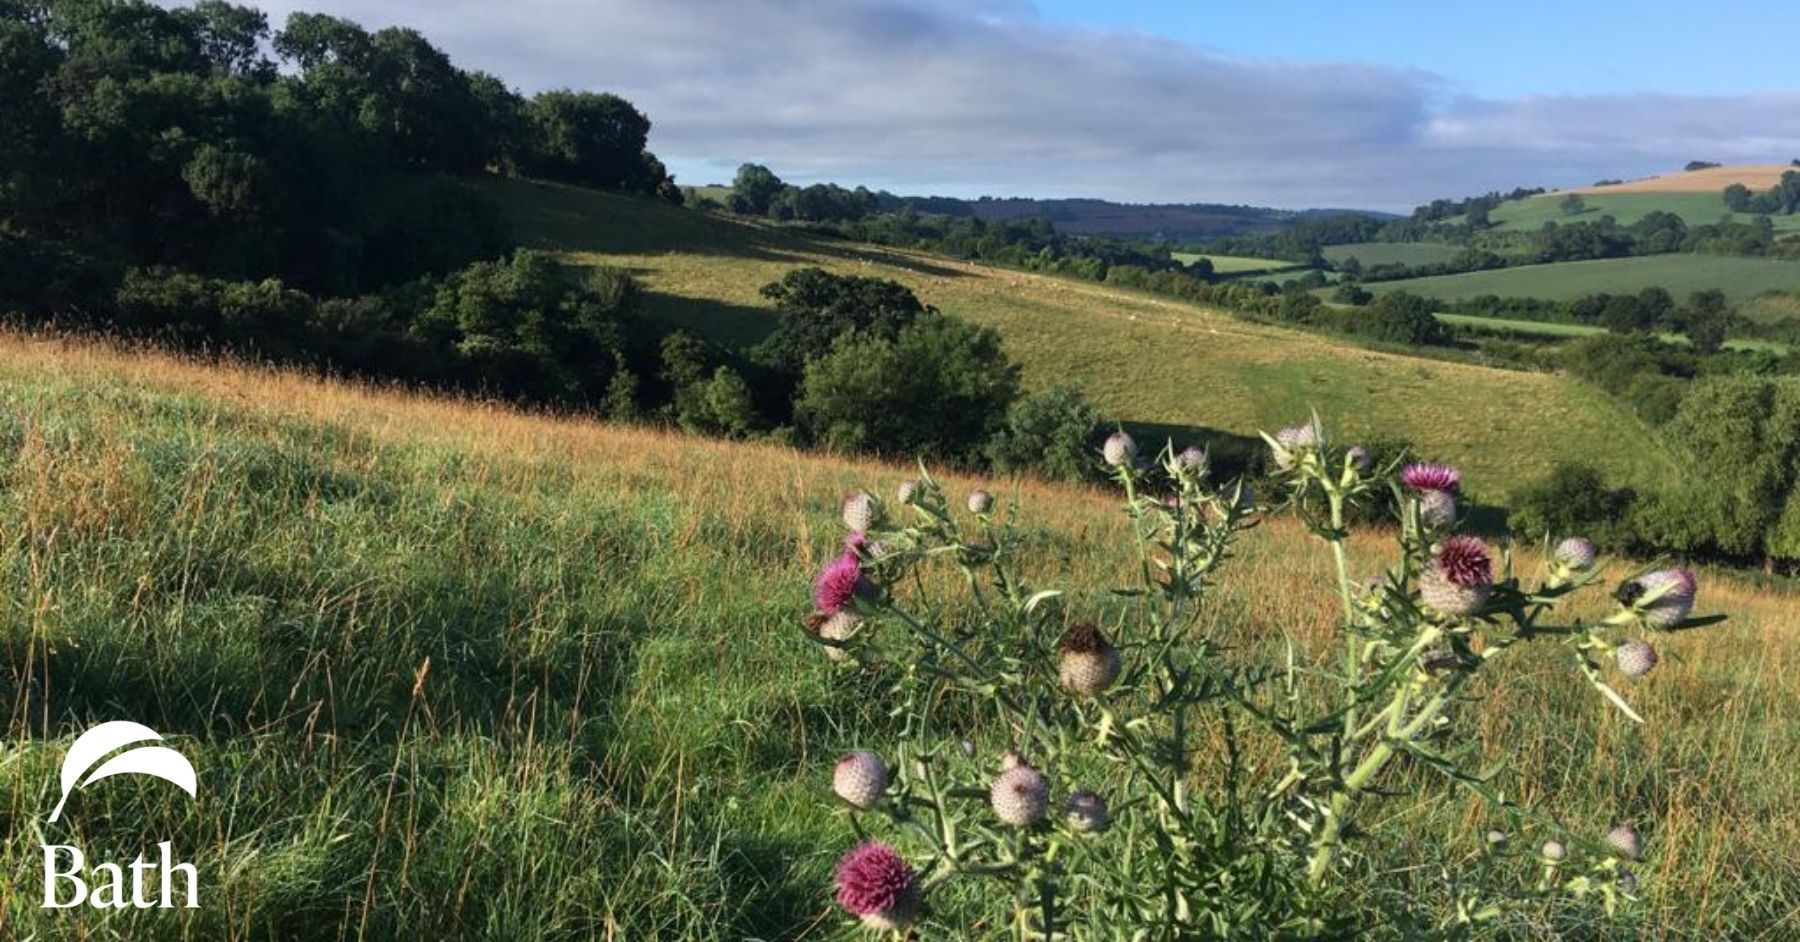 Catching up on 2021 with Bath Natural Burial Meadow